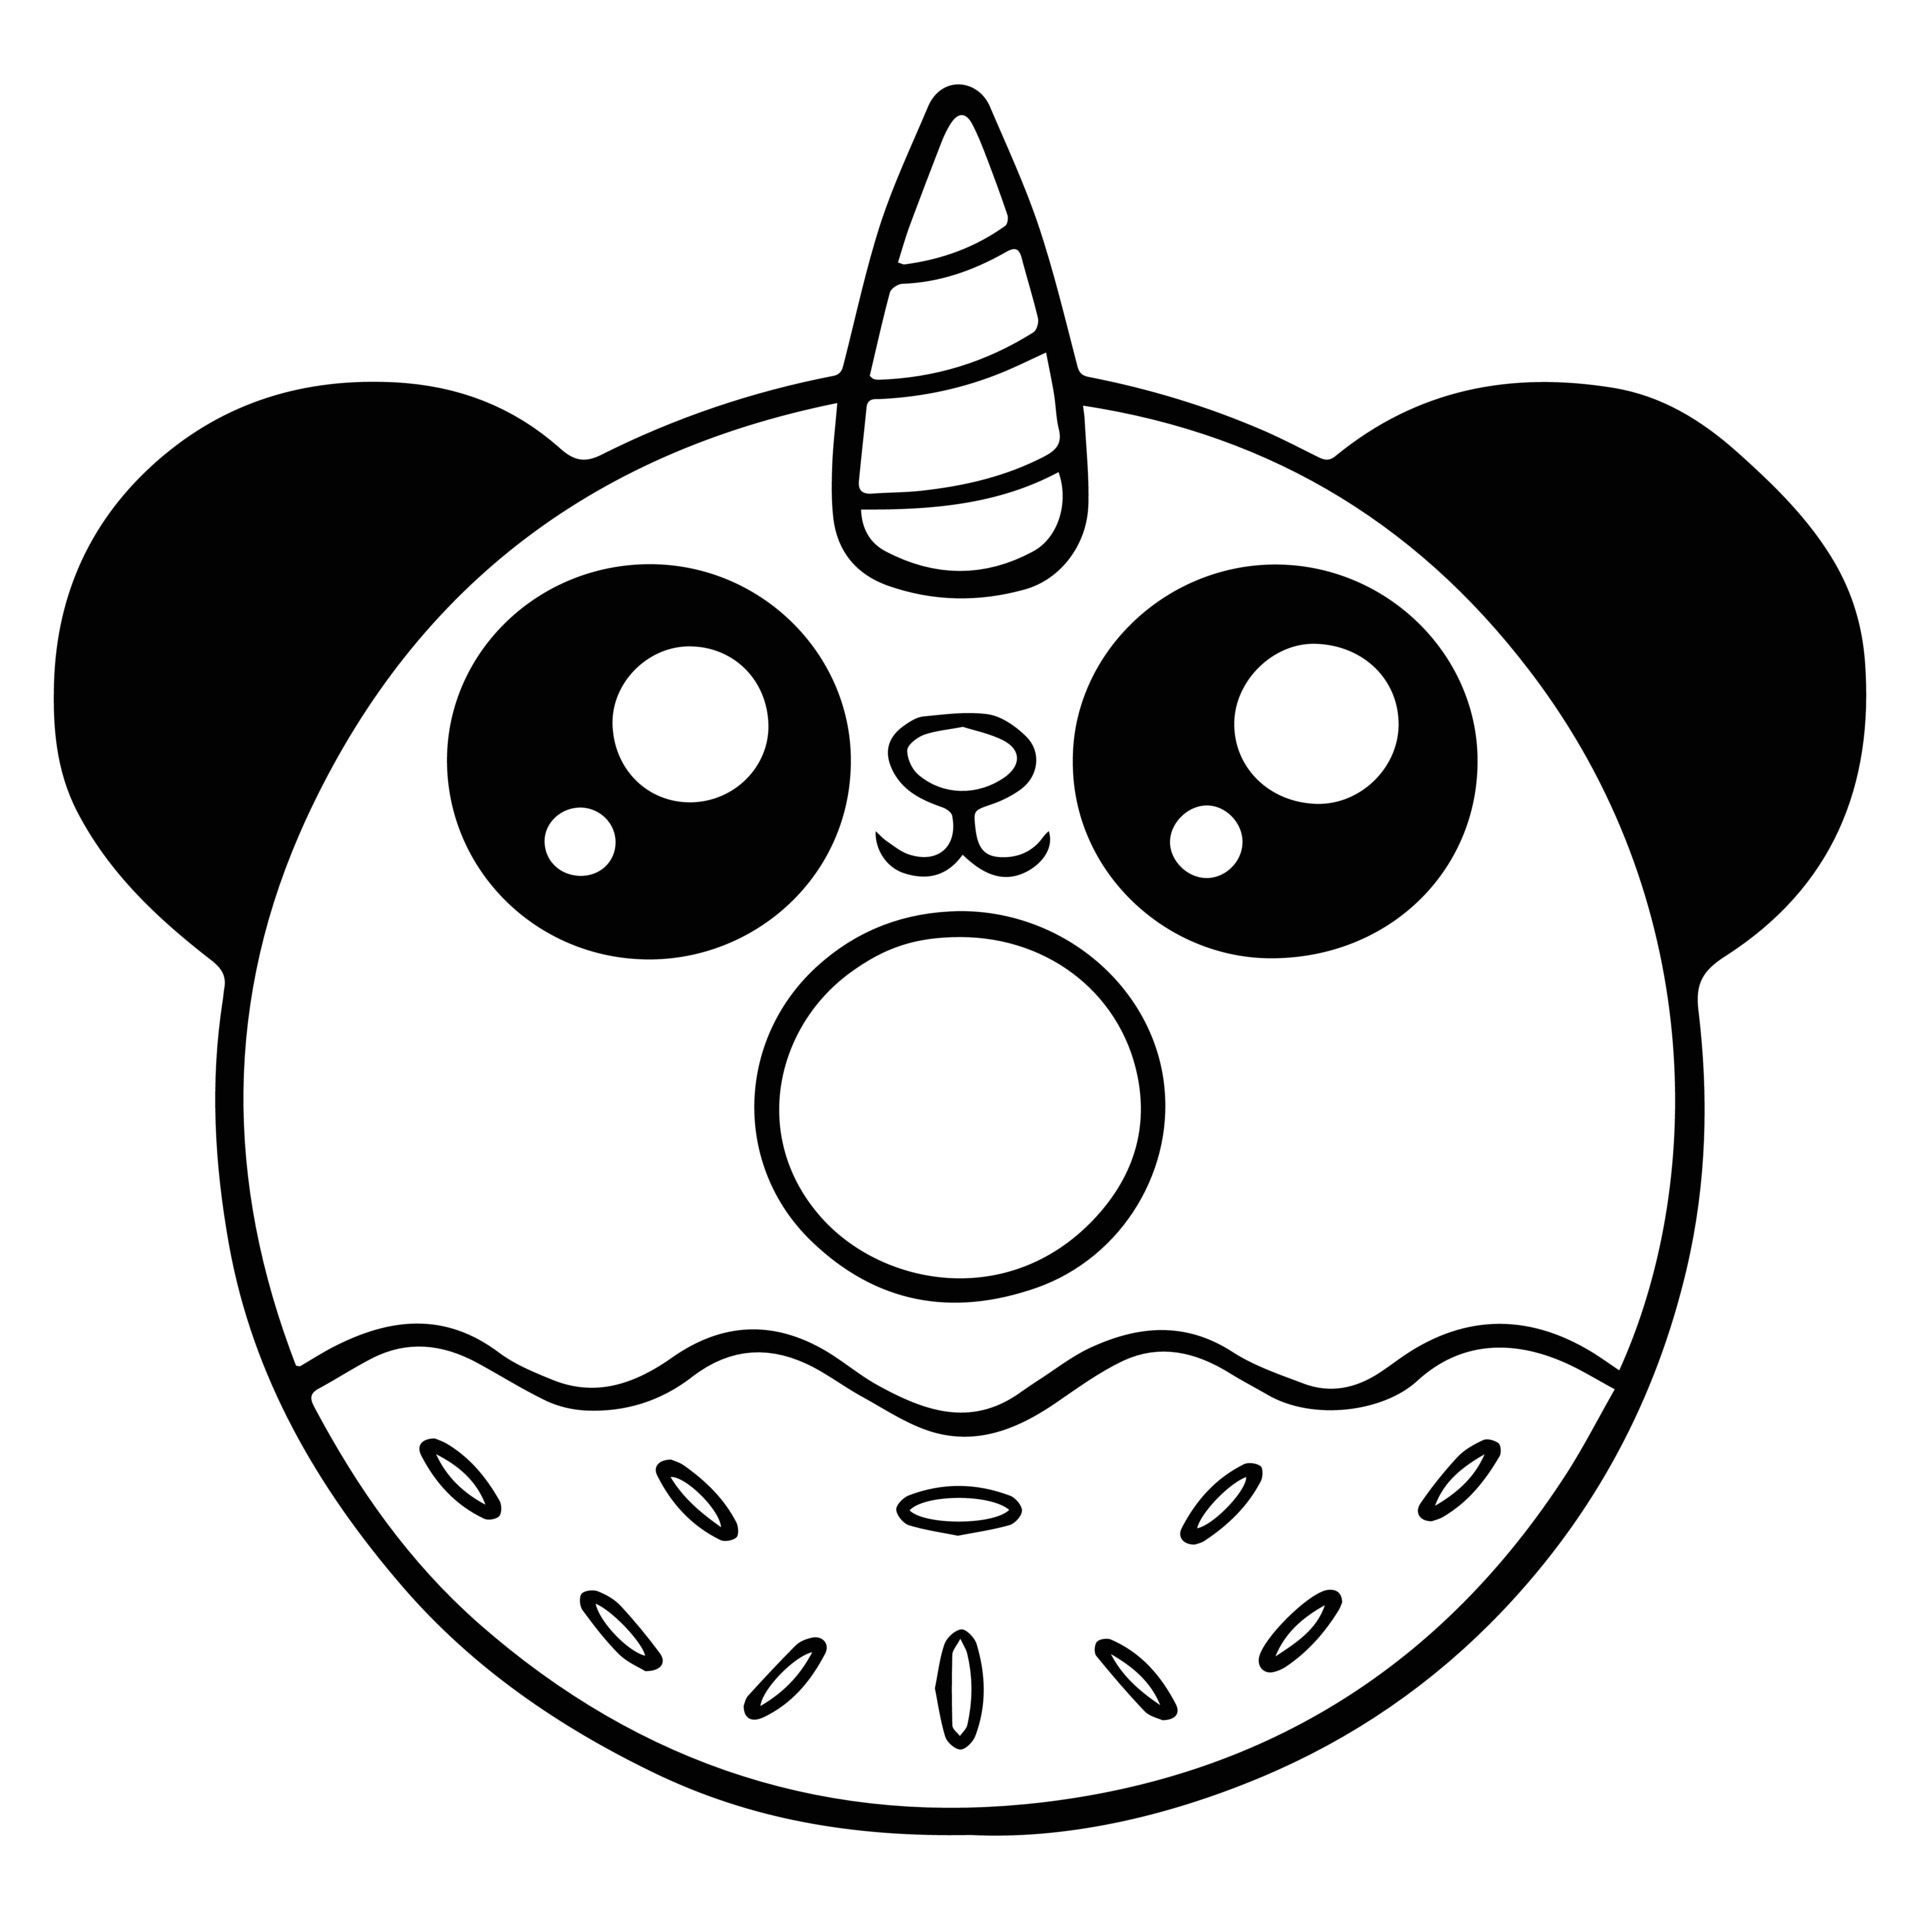 Panda Coloring Page Vector Art, Icons, and Graphics for Free Download